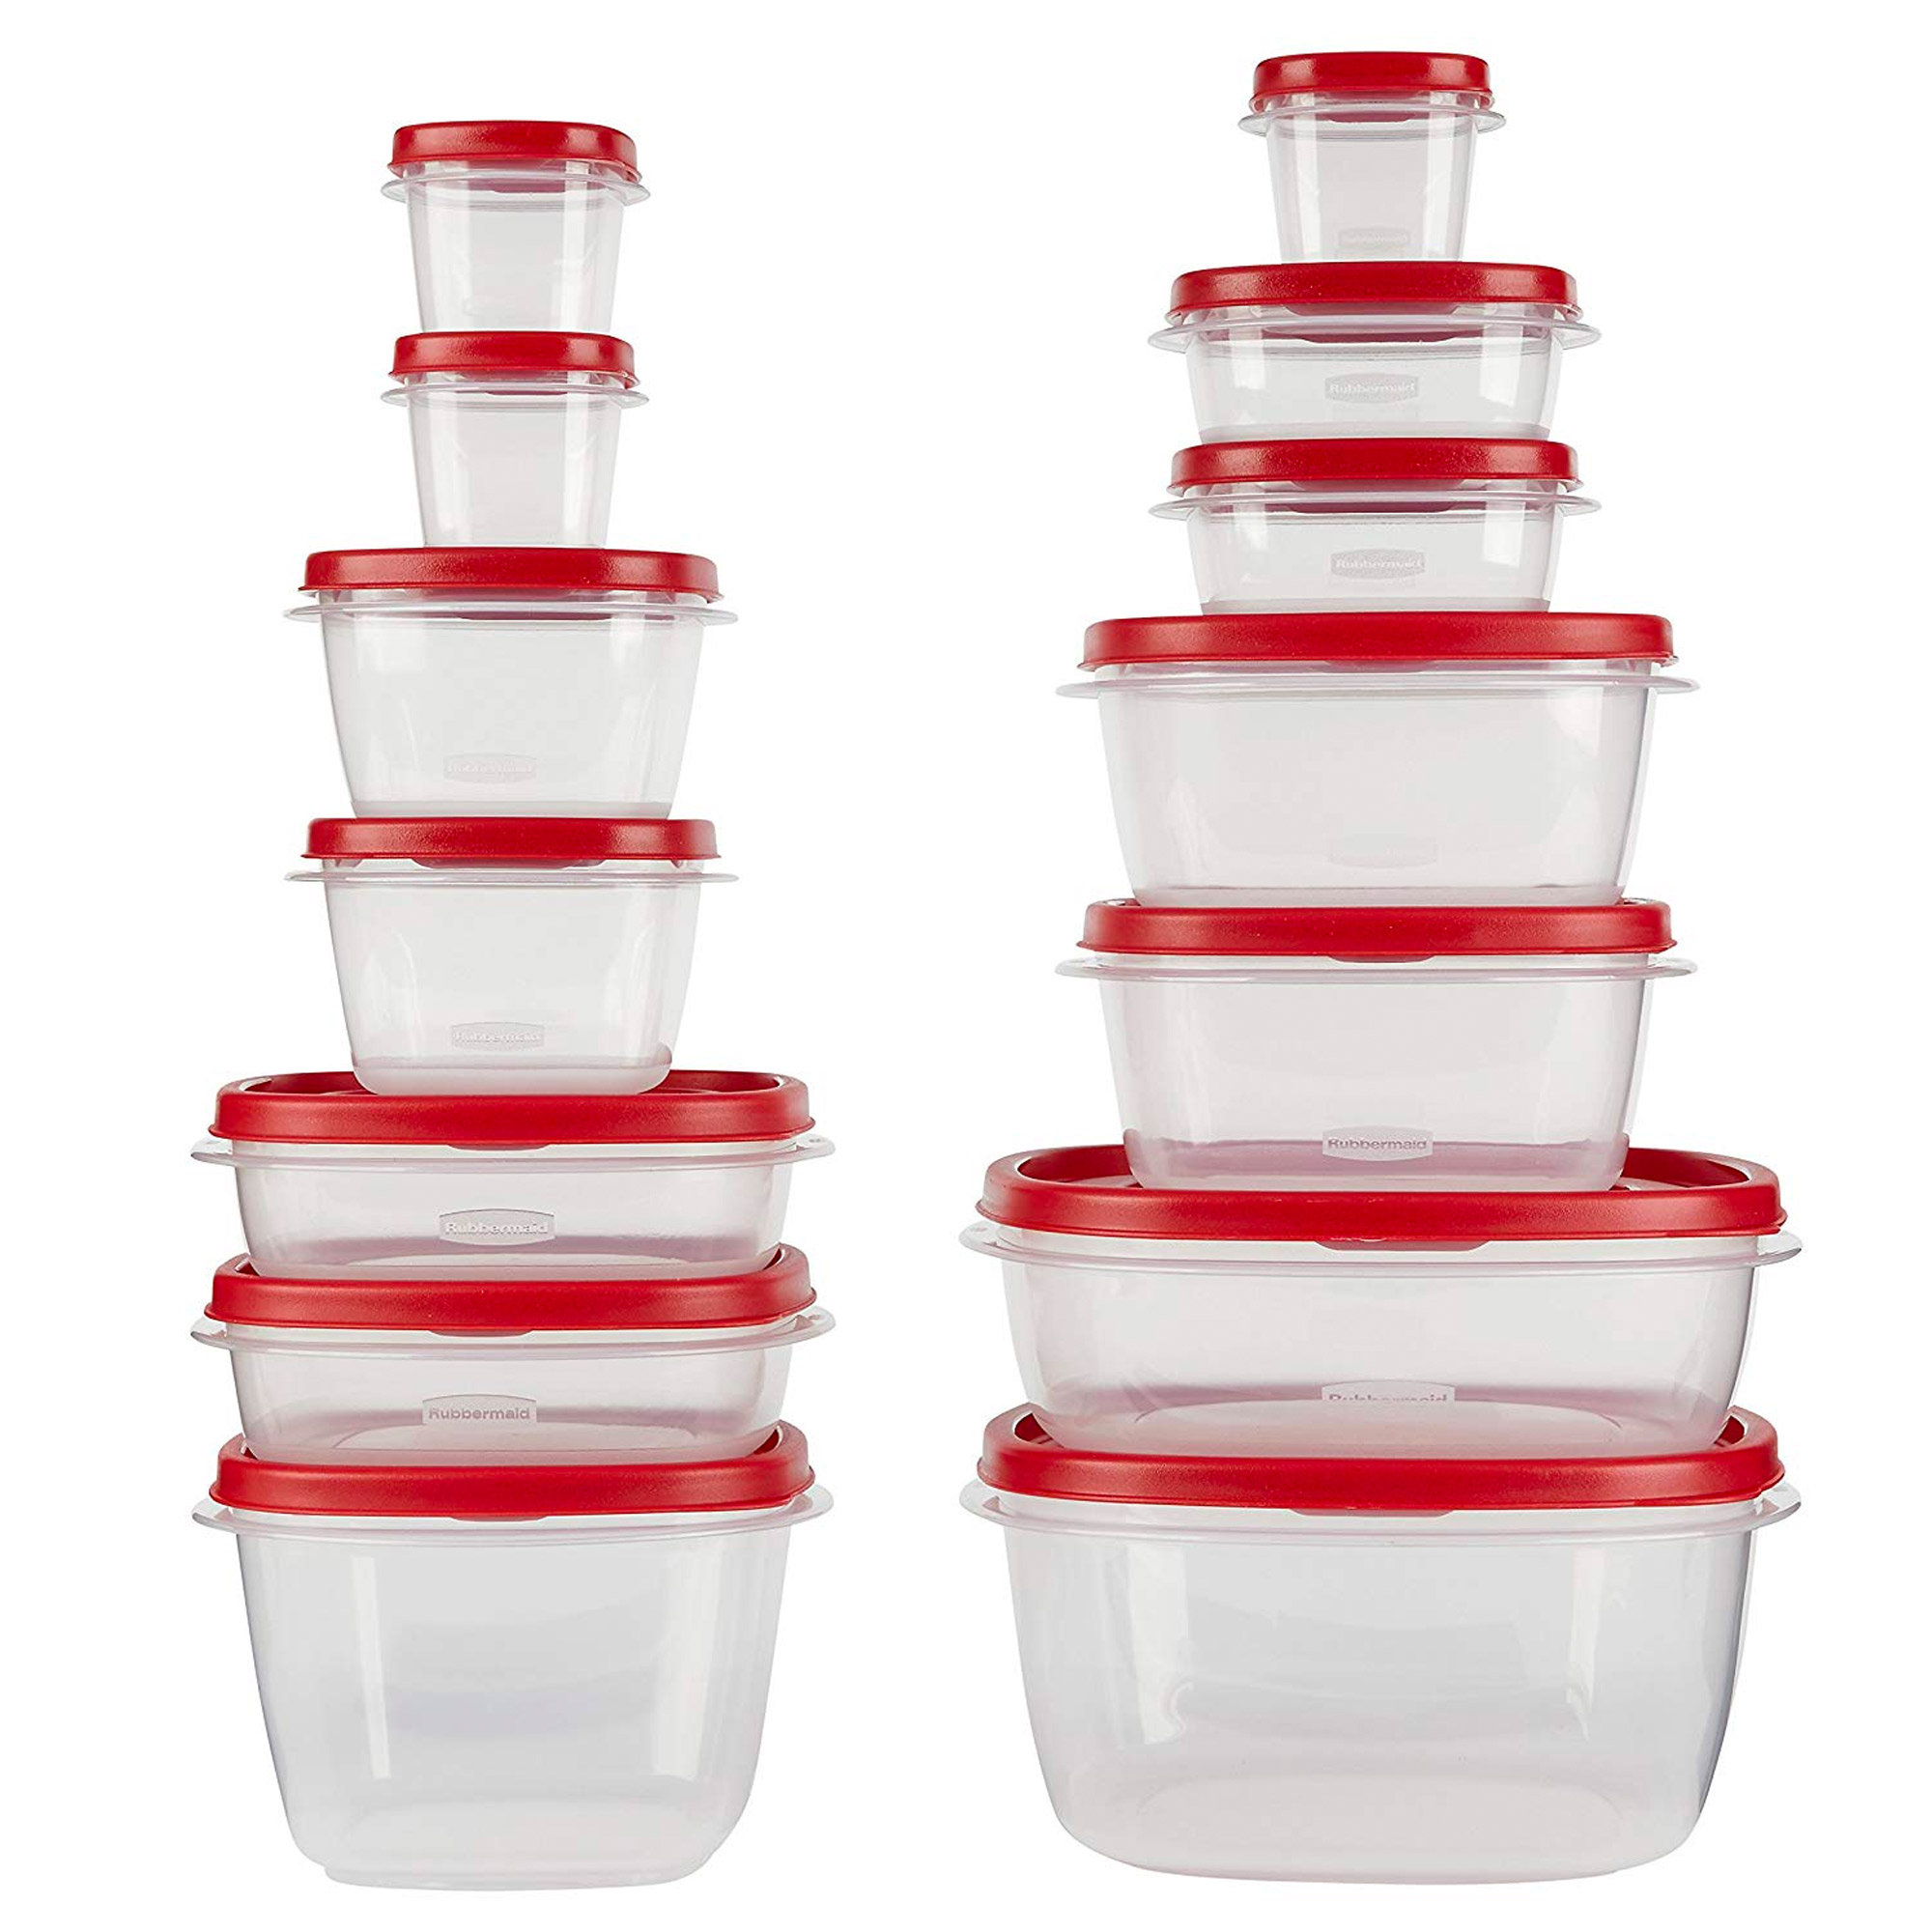 Rubbermaid Easy Find Lids Food Storage Containers with Lids - BPA Free Durable Plastic Food Containers Great for Home, School, Travel - Freezer, Microwave, and Dishwasher Safe - 28 Piece Set - Red - image 3 of 7